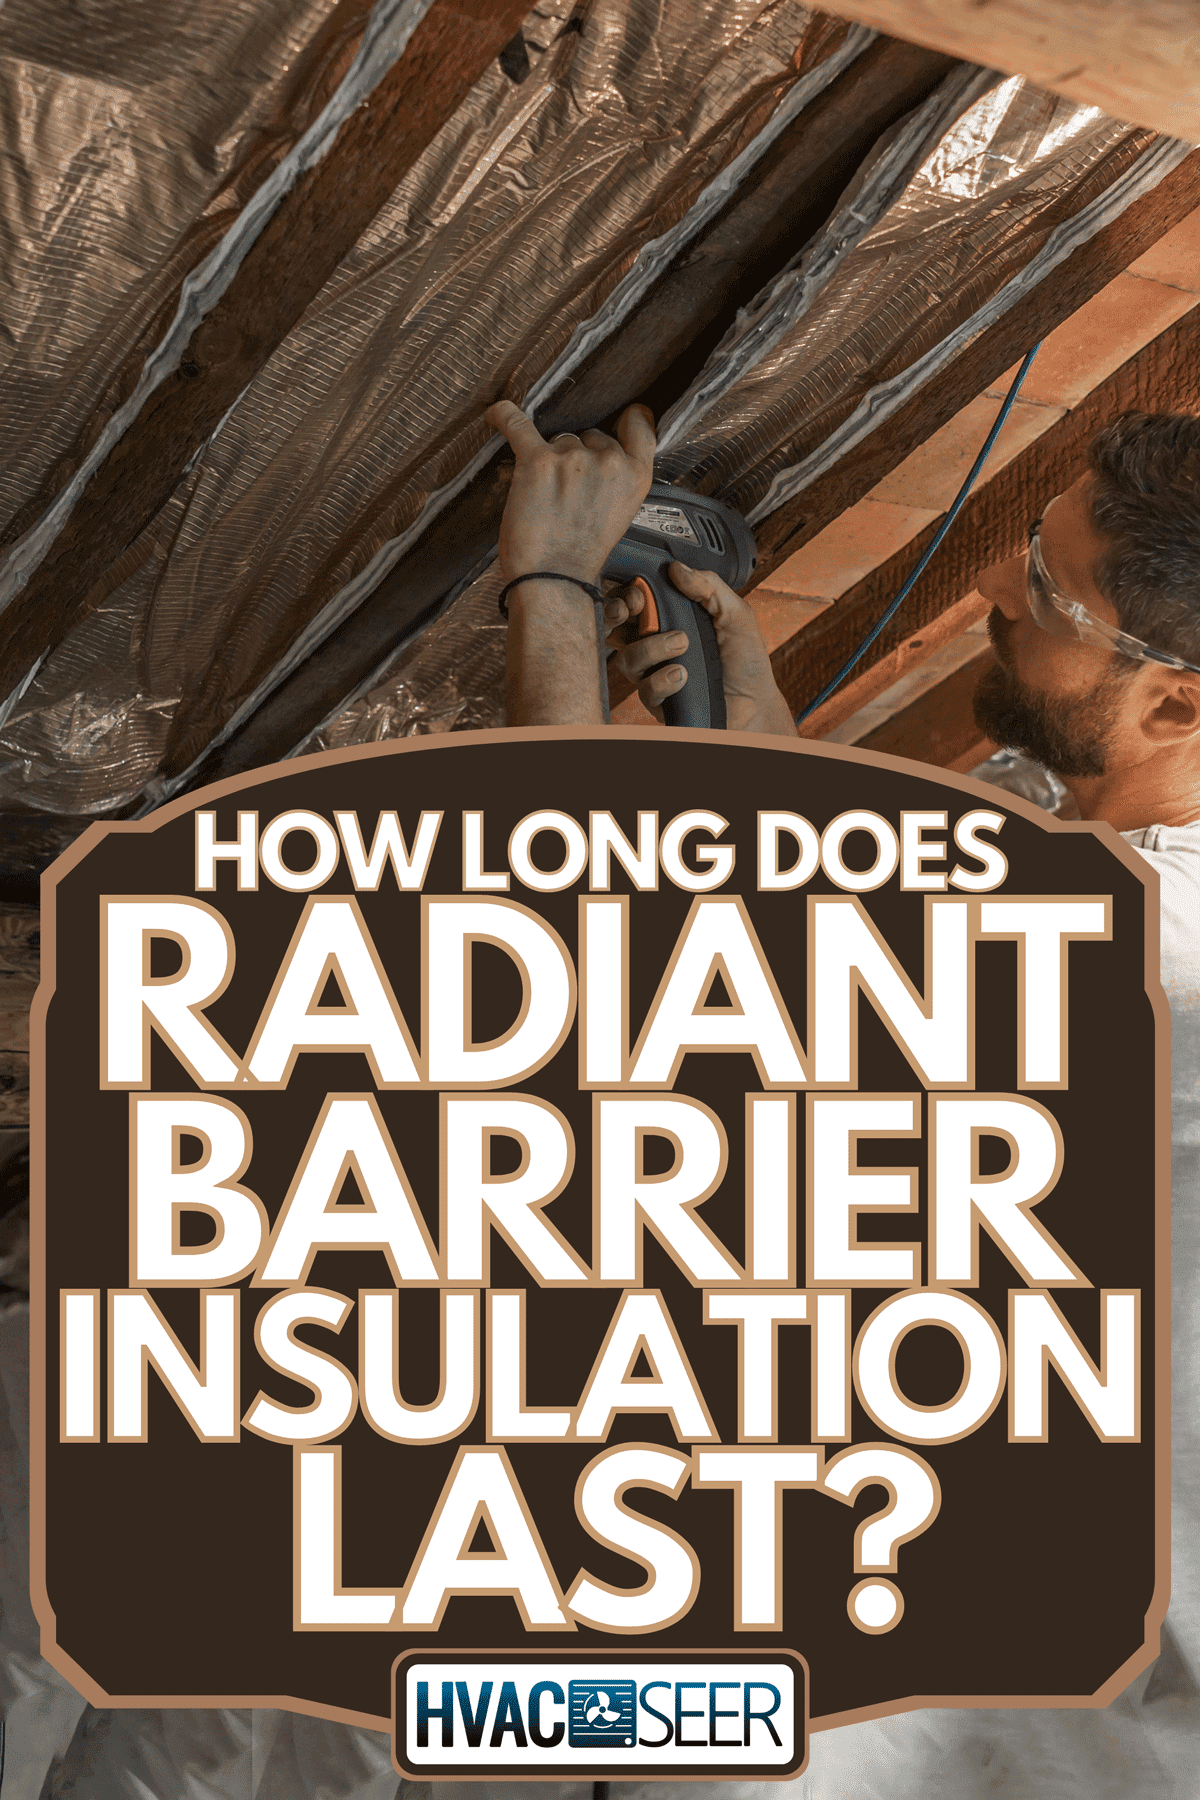 Man isolates the roofs of his house, How Long Does Radiant Barrier Insulation Last?